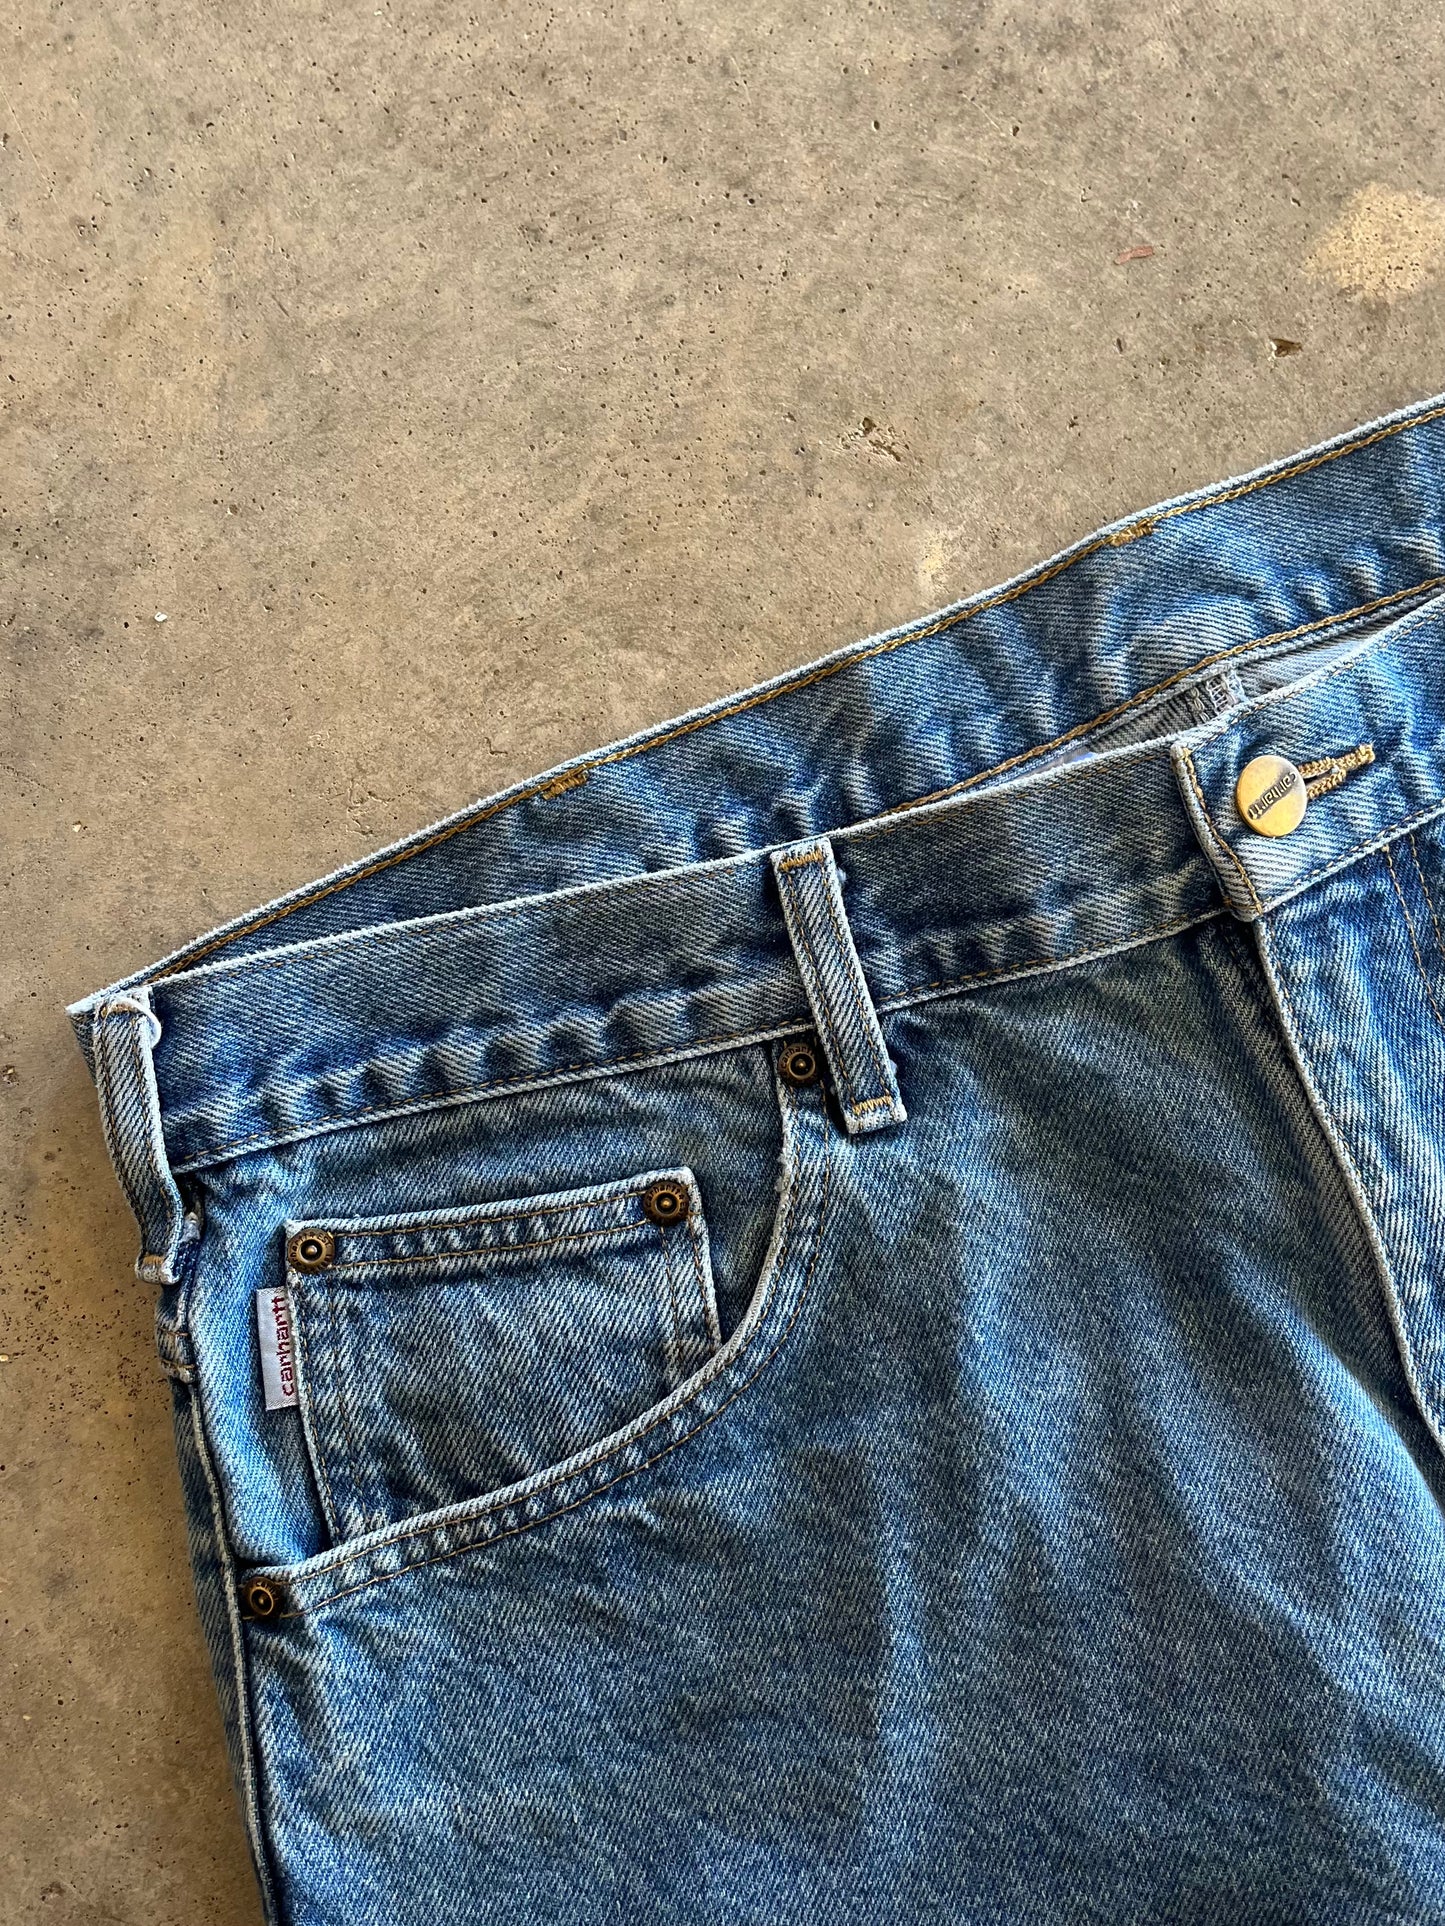 (38 x 32) Carhartt Relaxed Fit Denim Jeans